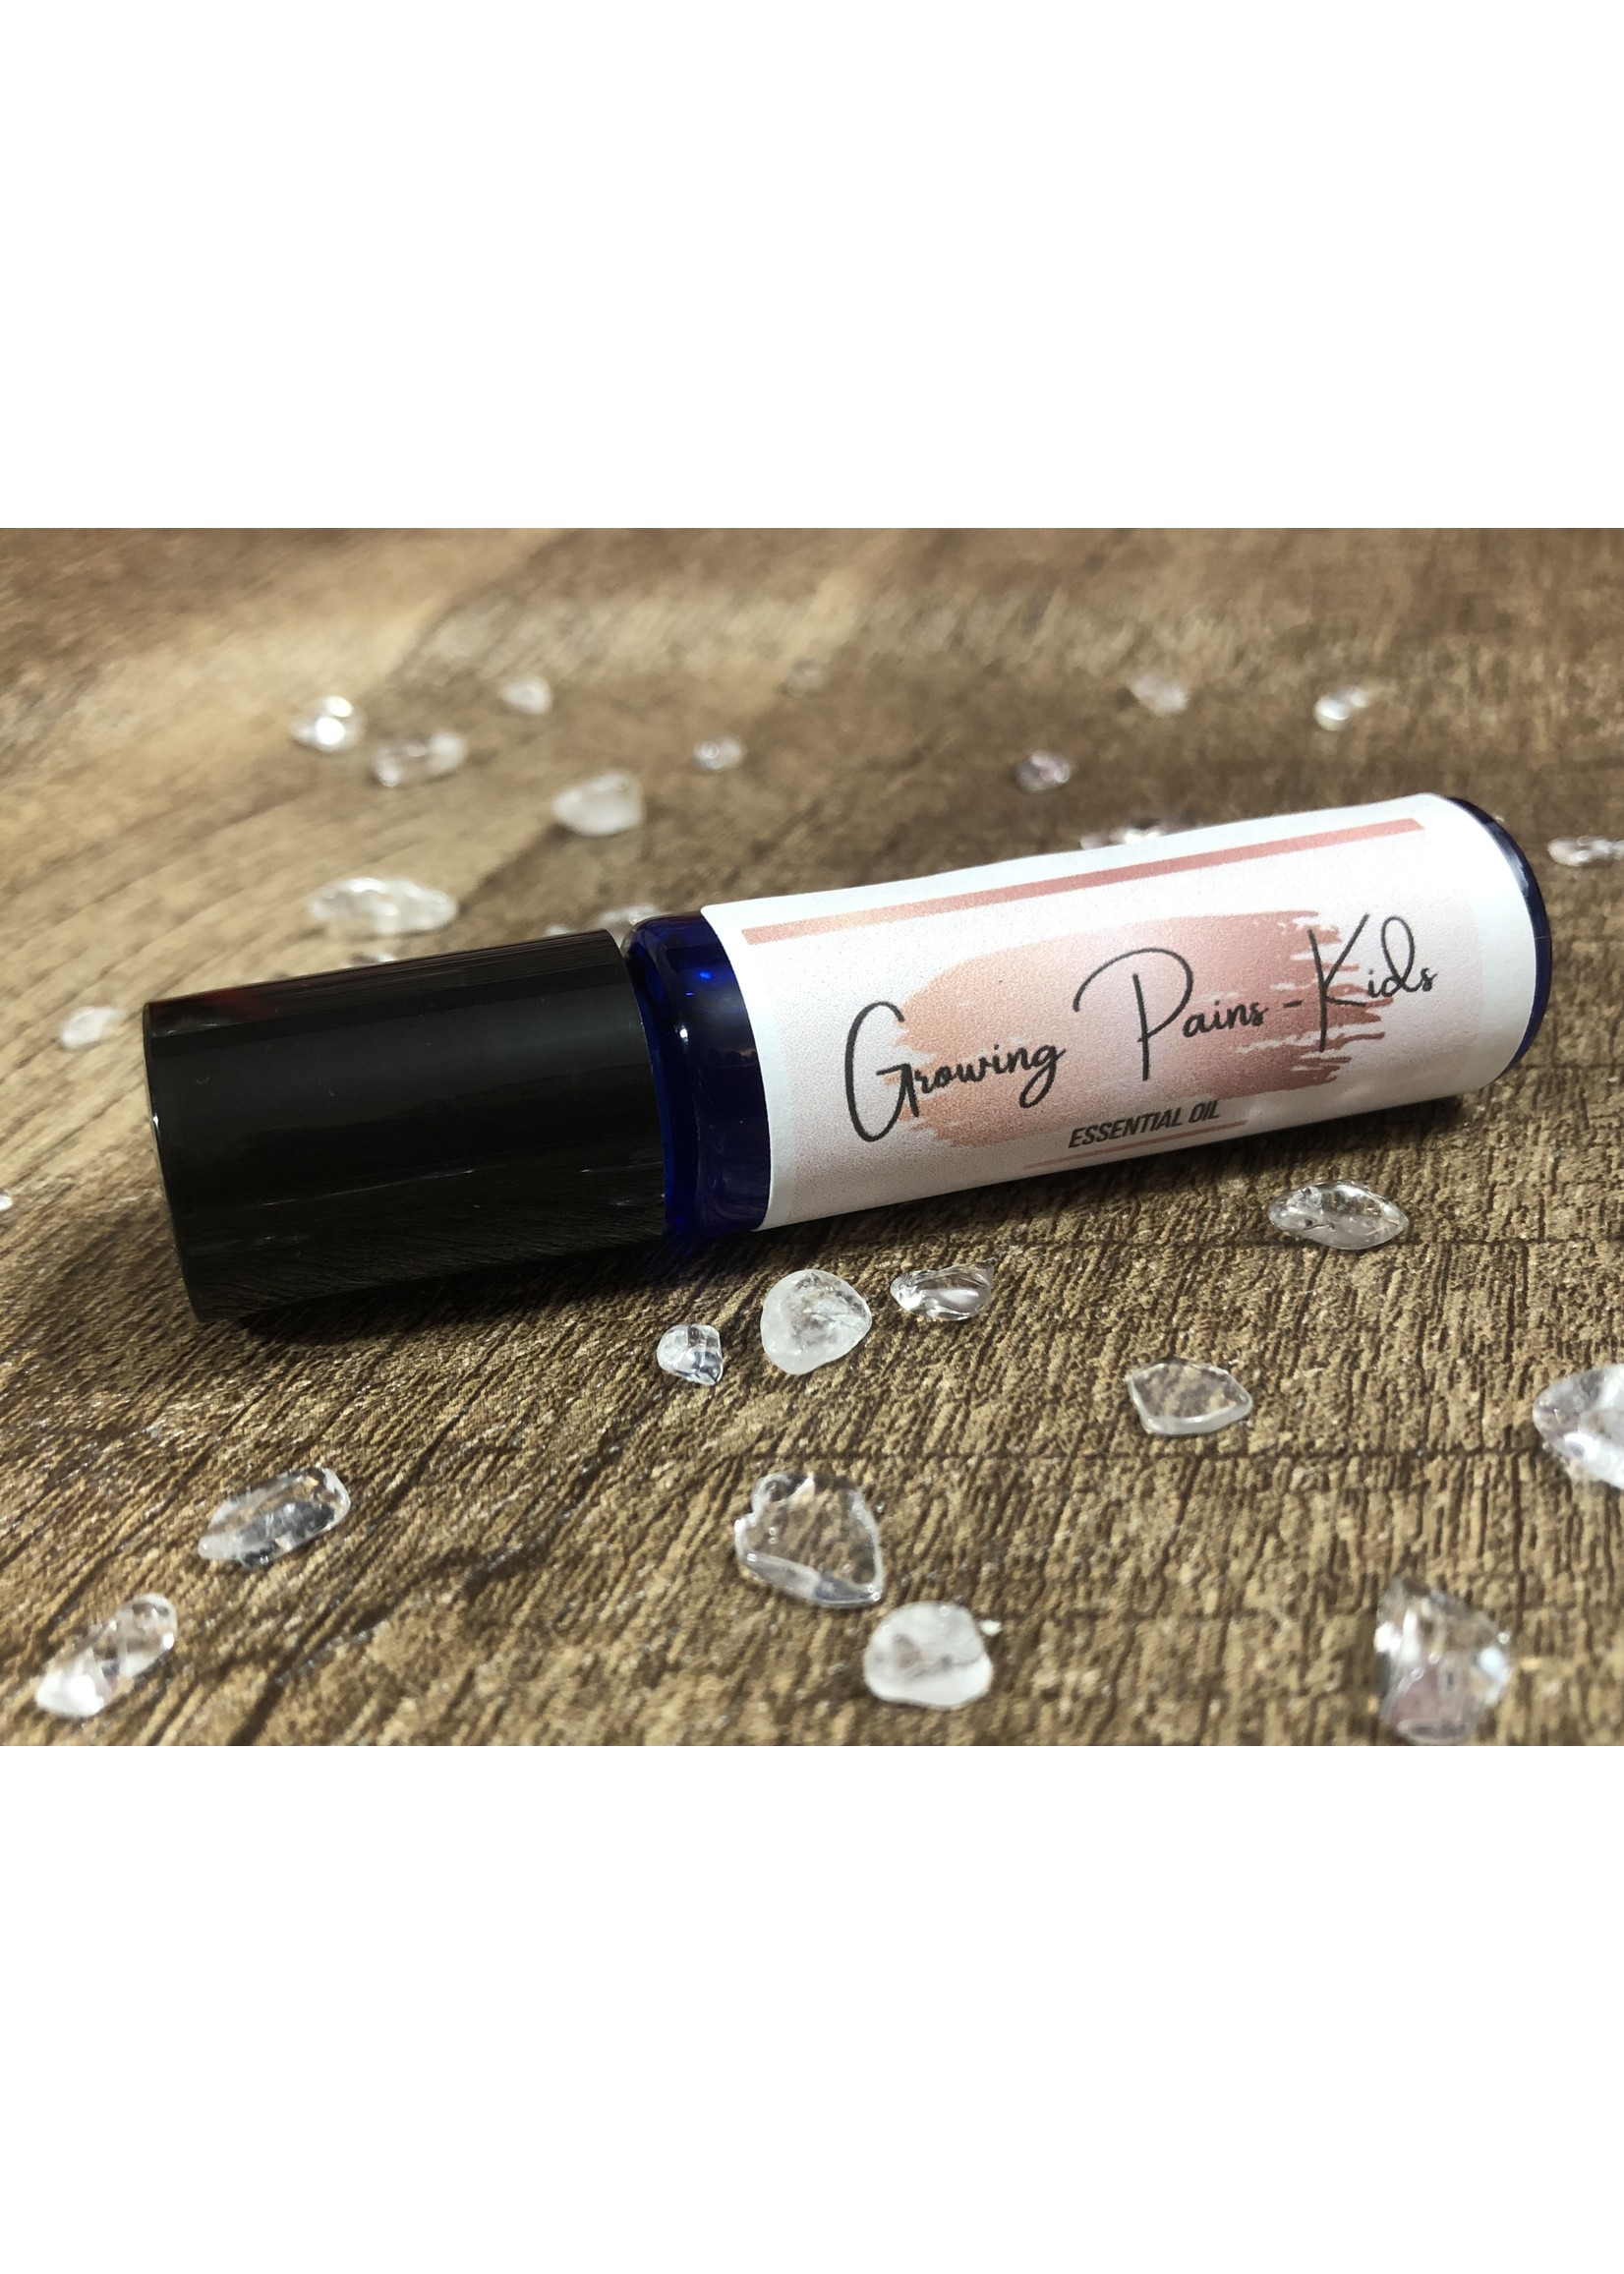 Growing Pains - Kids Essential Oil Roll-on w/ Clear Quartz Crystals